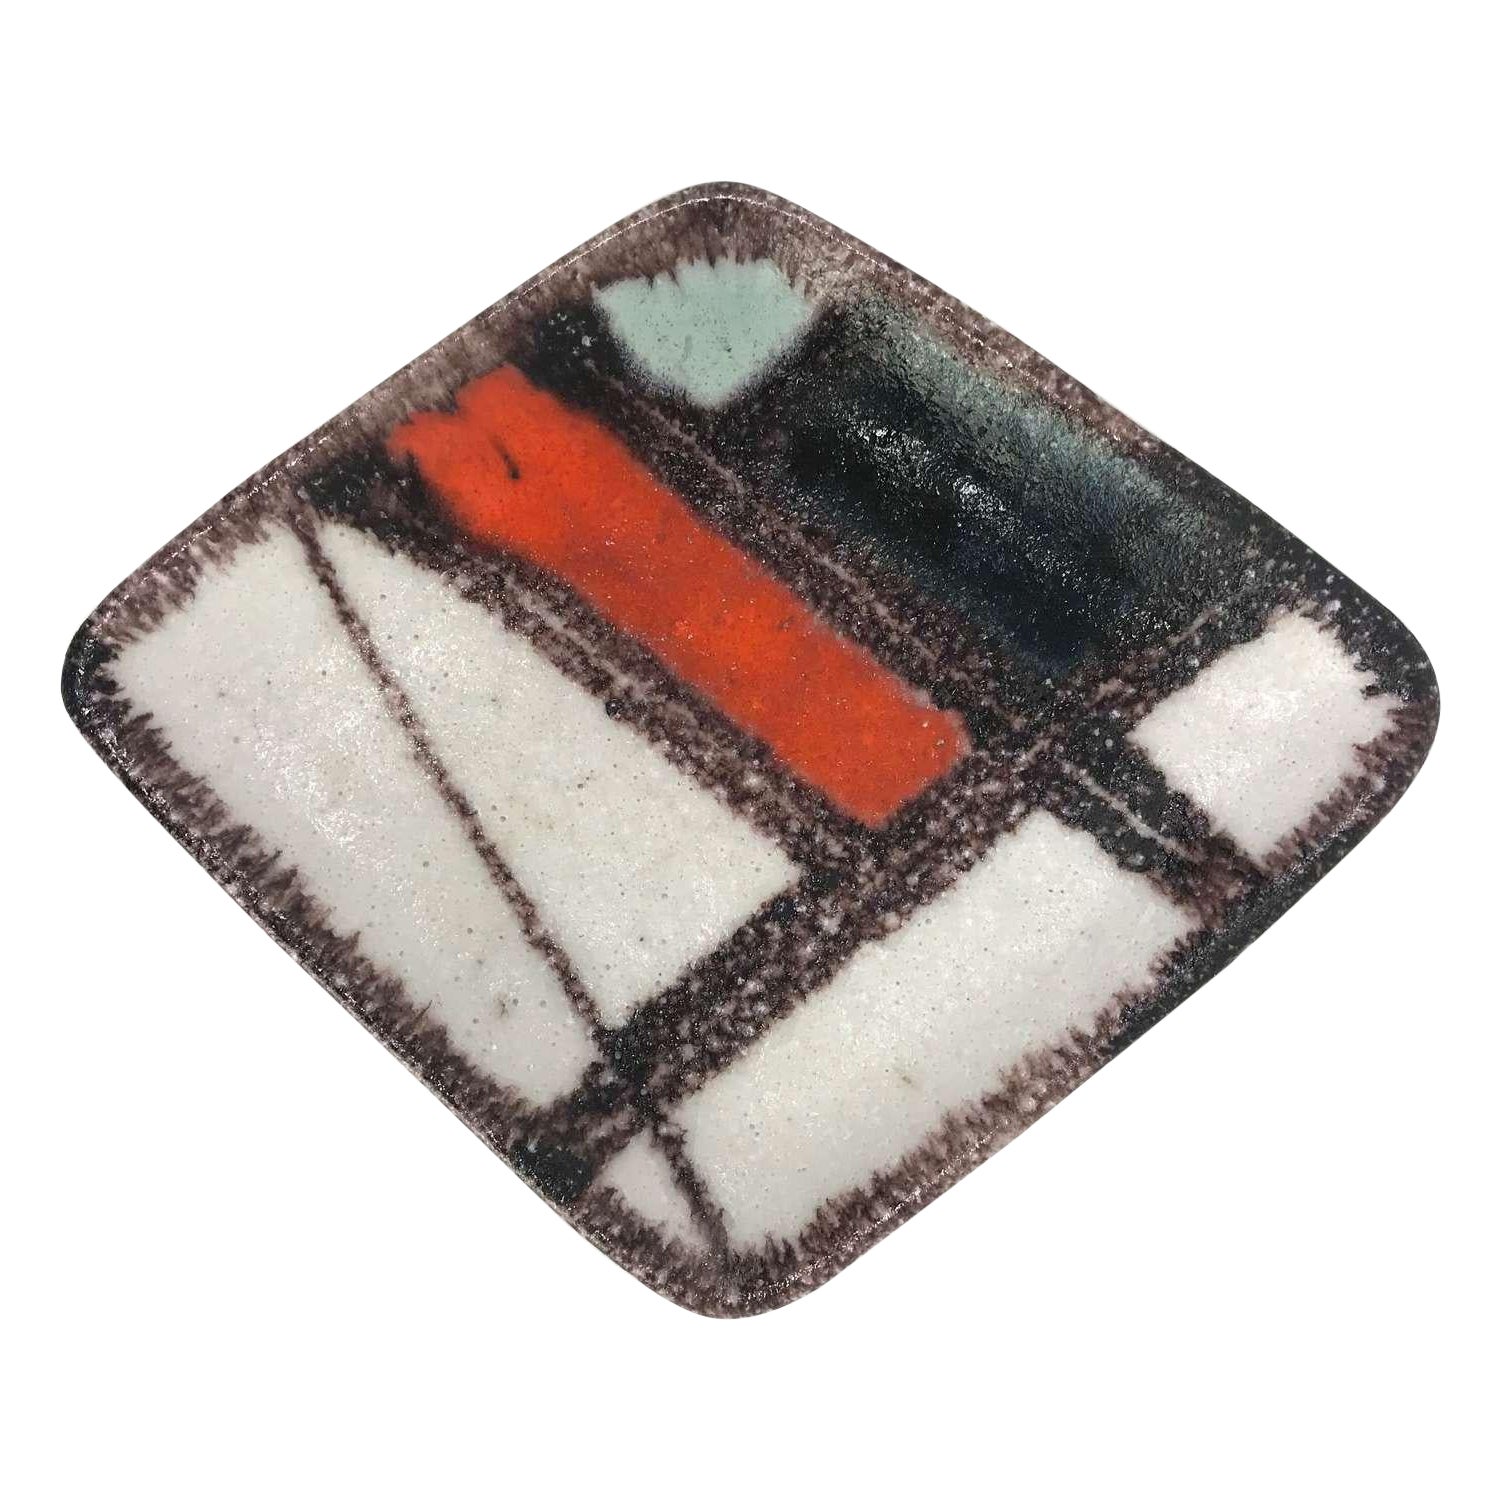 Guido Gambone Rhomboid Ceramic Dish with Abstract Pattern, Italy, c1950s For Sale